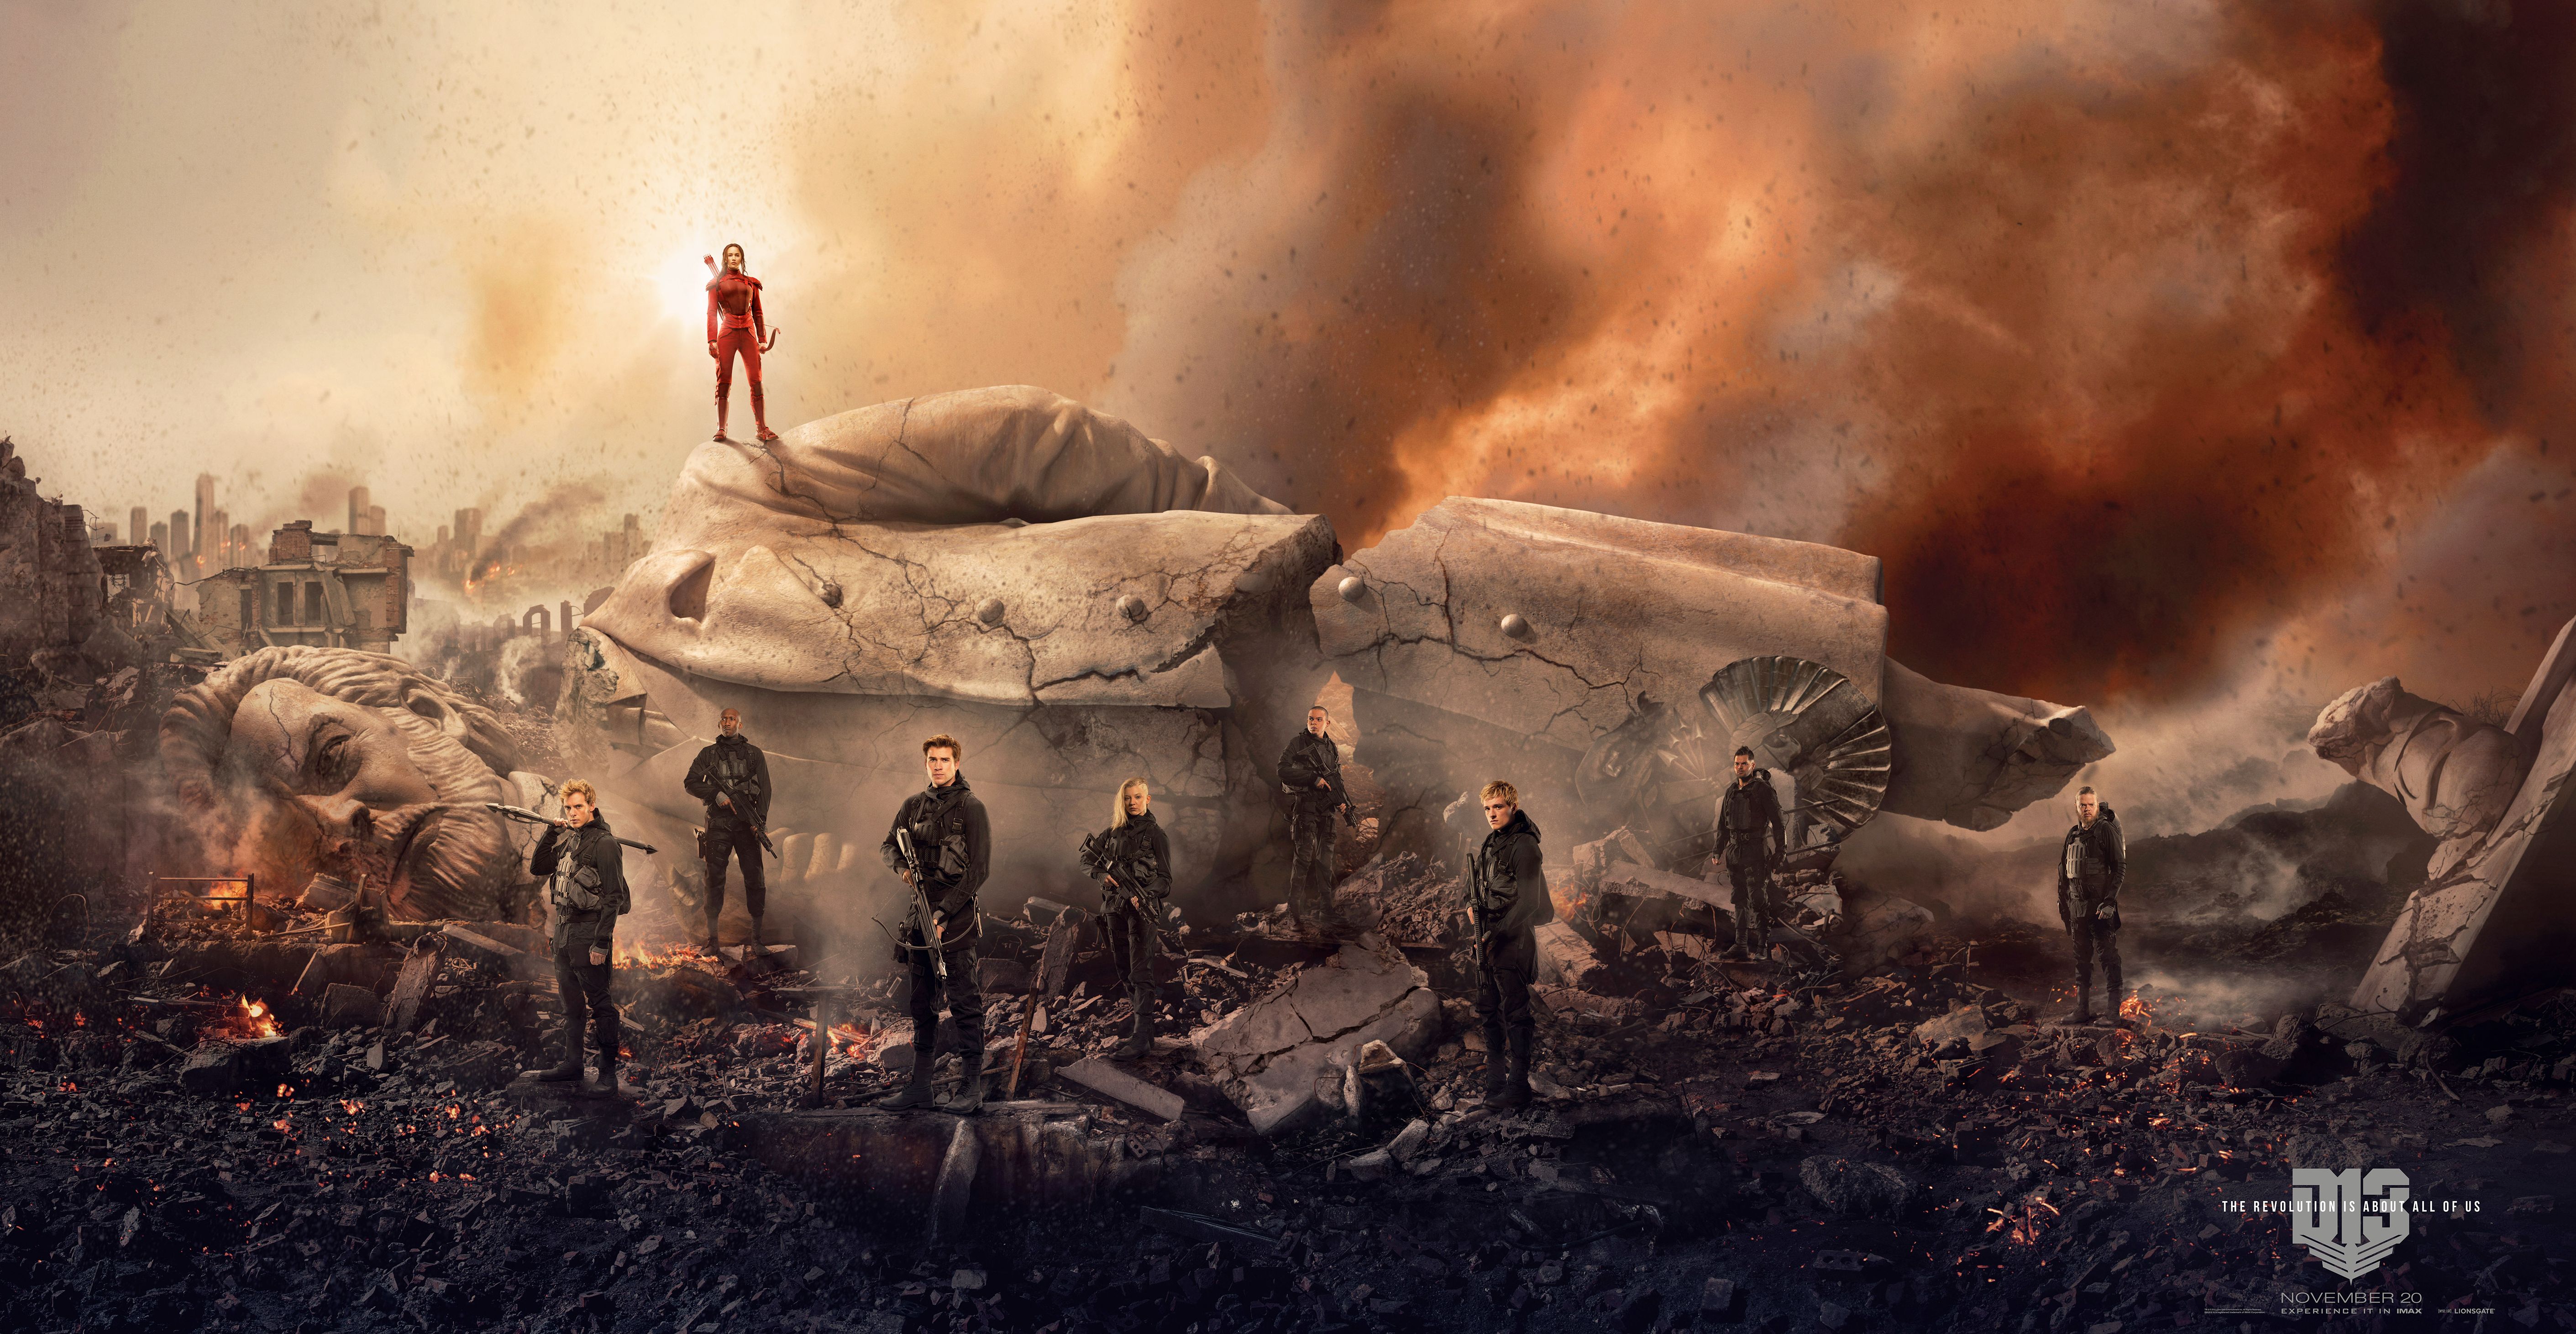 New Banner for 'The Hunger Games: Mockingjay Part 2' Shows O